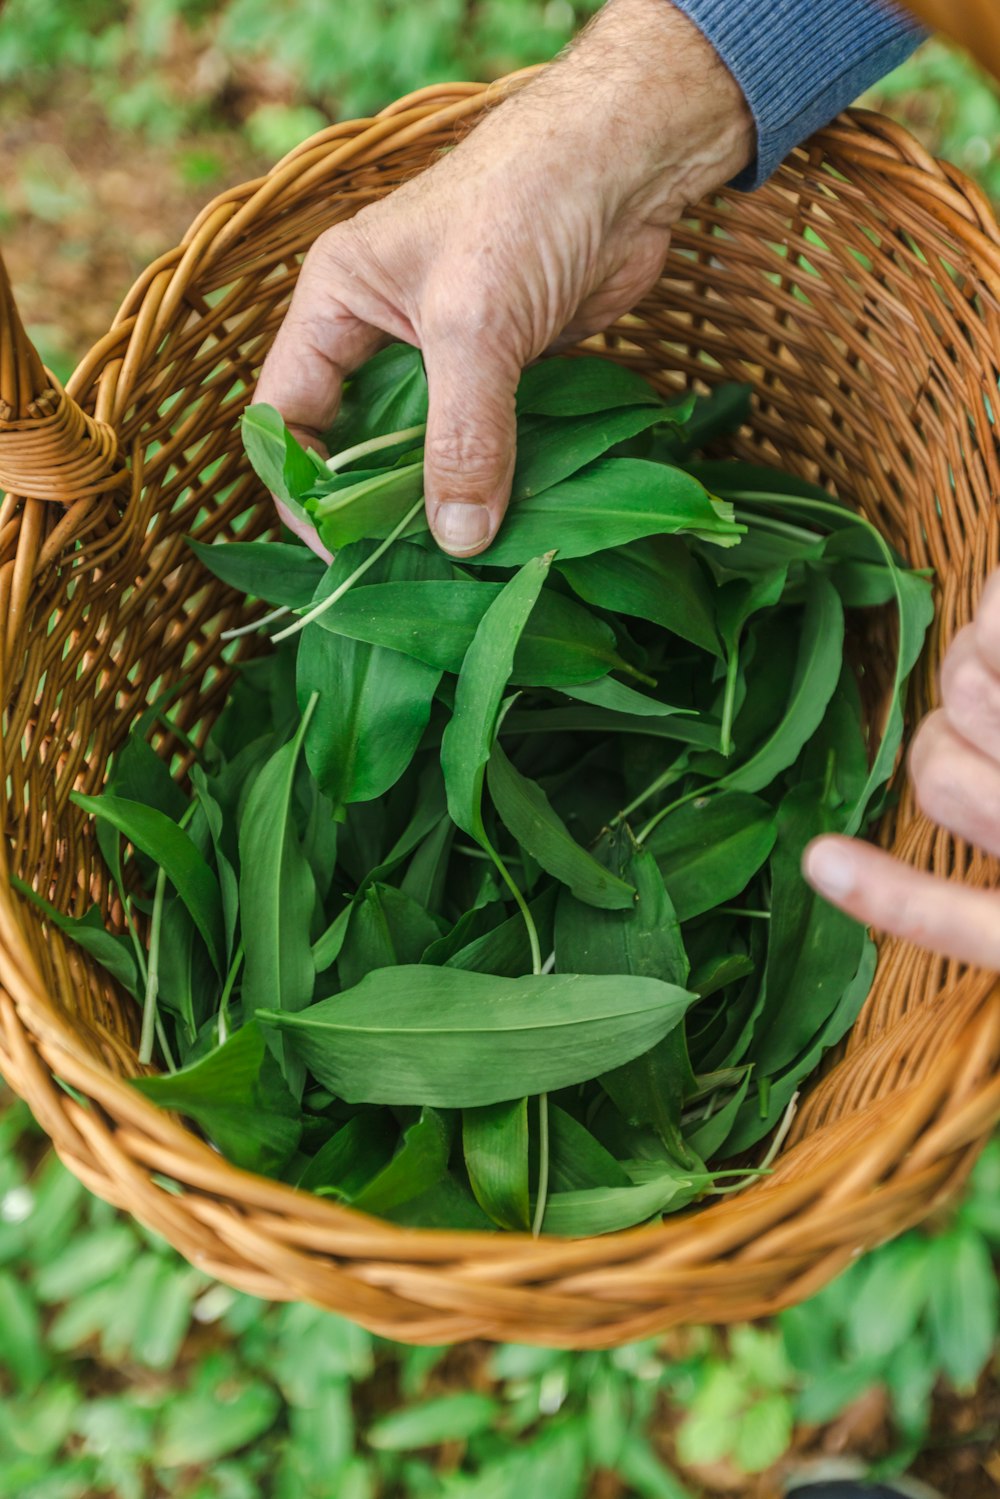 a person holding a basket filled with green leaves